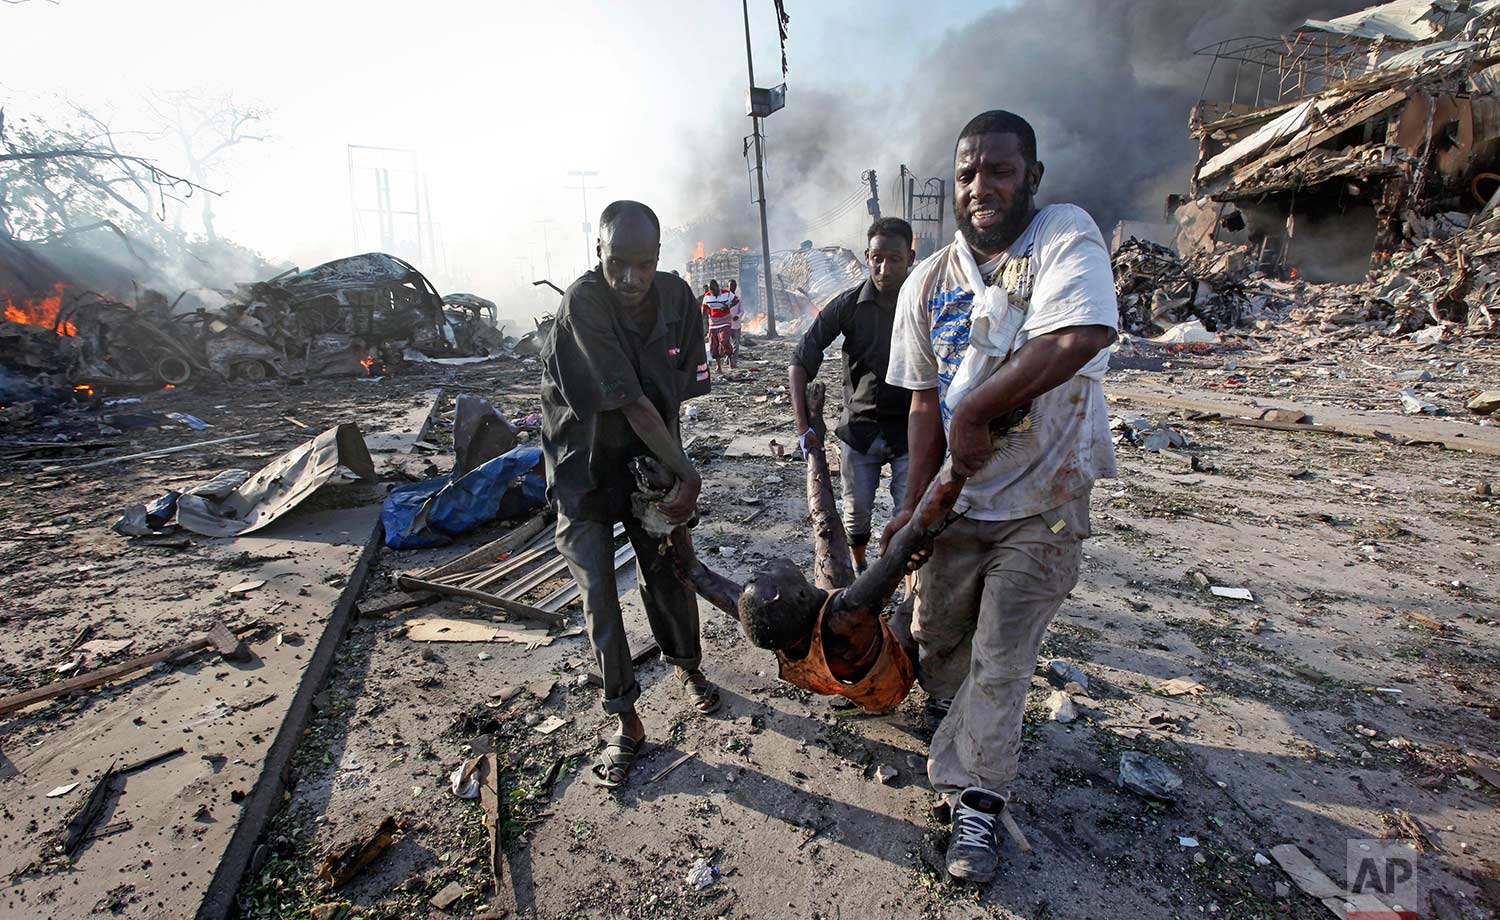  In this Saturday, Oct. 14, 2017 photo, Somalis remove the body of a man killed in a blast in the capital Mogadishu, Somalia. A huge explosion from a truck bomb has killed at least 20 people in Somalia's capital, police said Saturday, as shaken resid